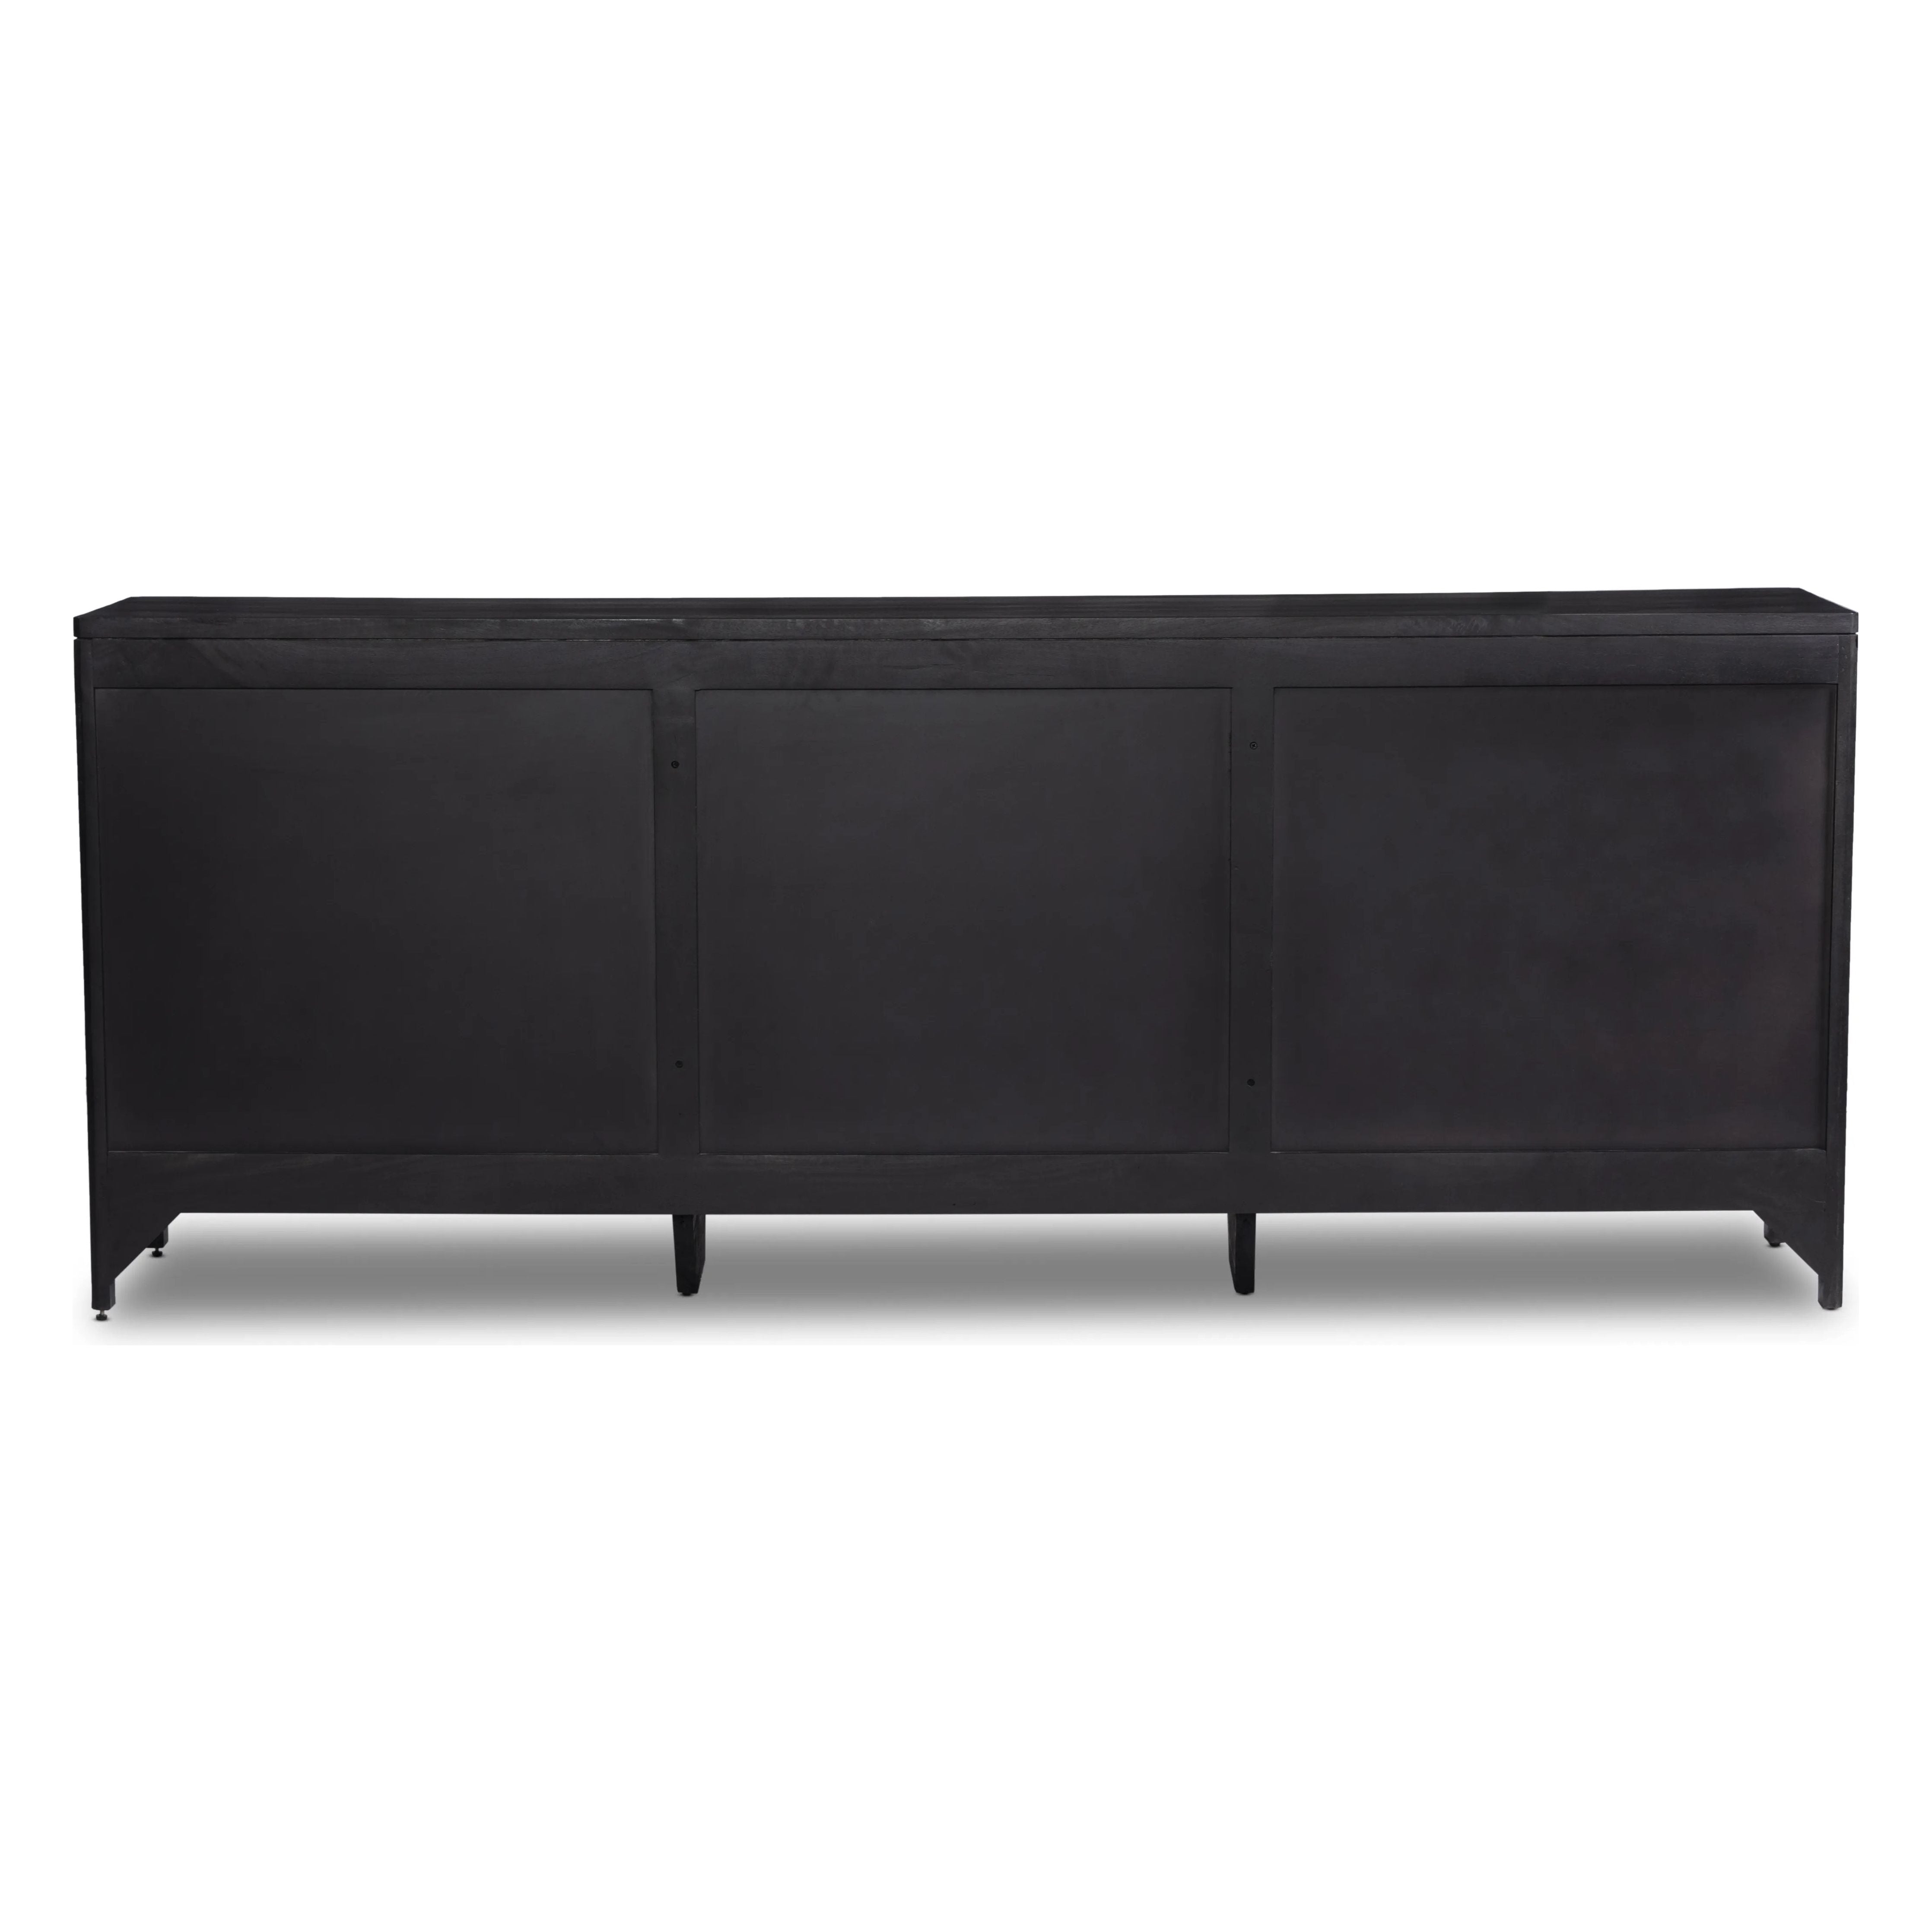 Black-finished mango encases nine spacious drawers of woven black cane, for a textural, monochromatic look Amethyst Home provides interior design, new home construction design consulting, vintage area rugs, and lighting in the Charlotte metro area.